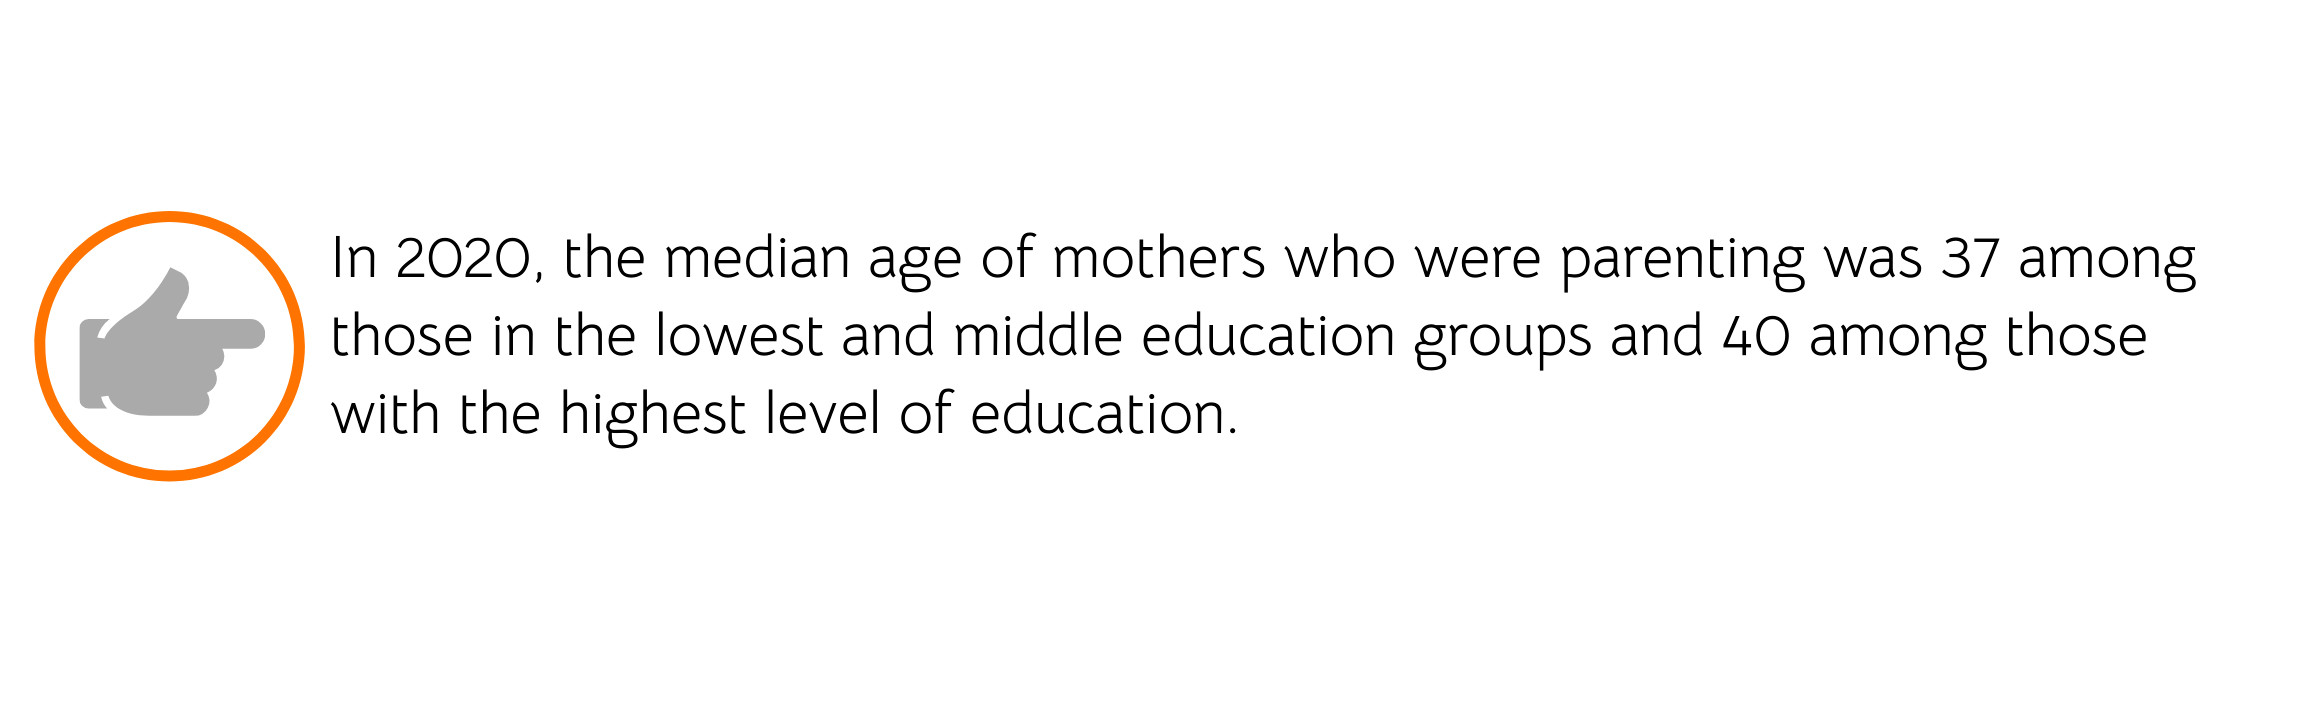 In 2020 the median age of mothers who were parenting was 37 among those in the lowest and middle education groups and 40 among those with the highest level of education